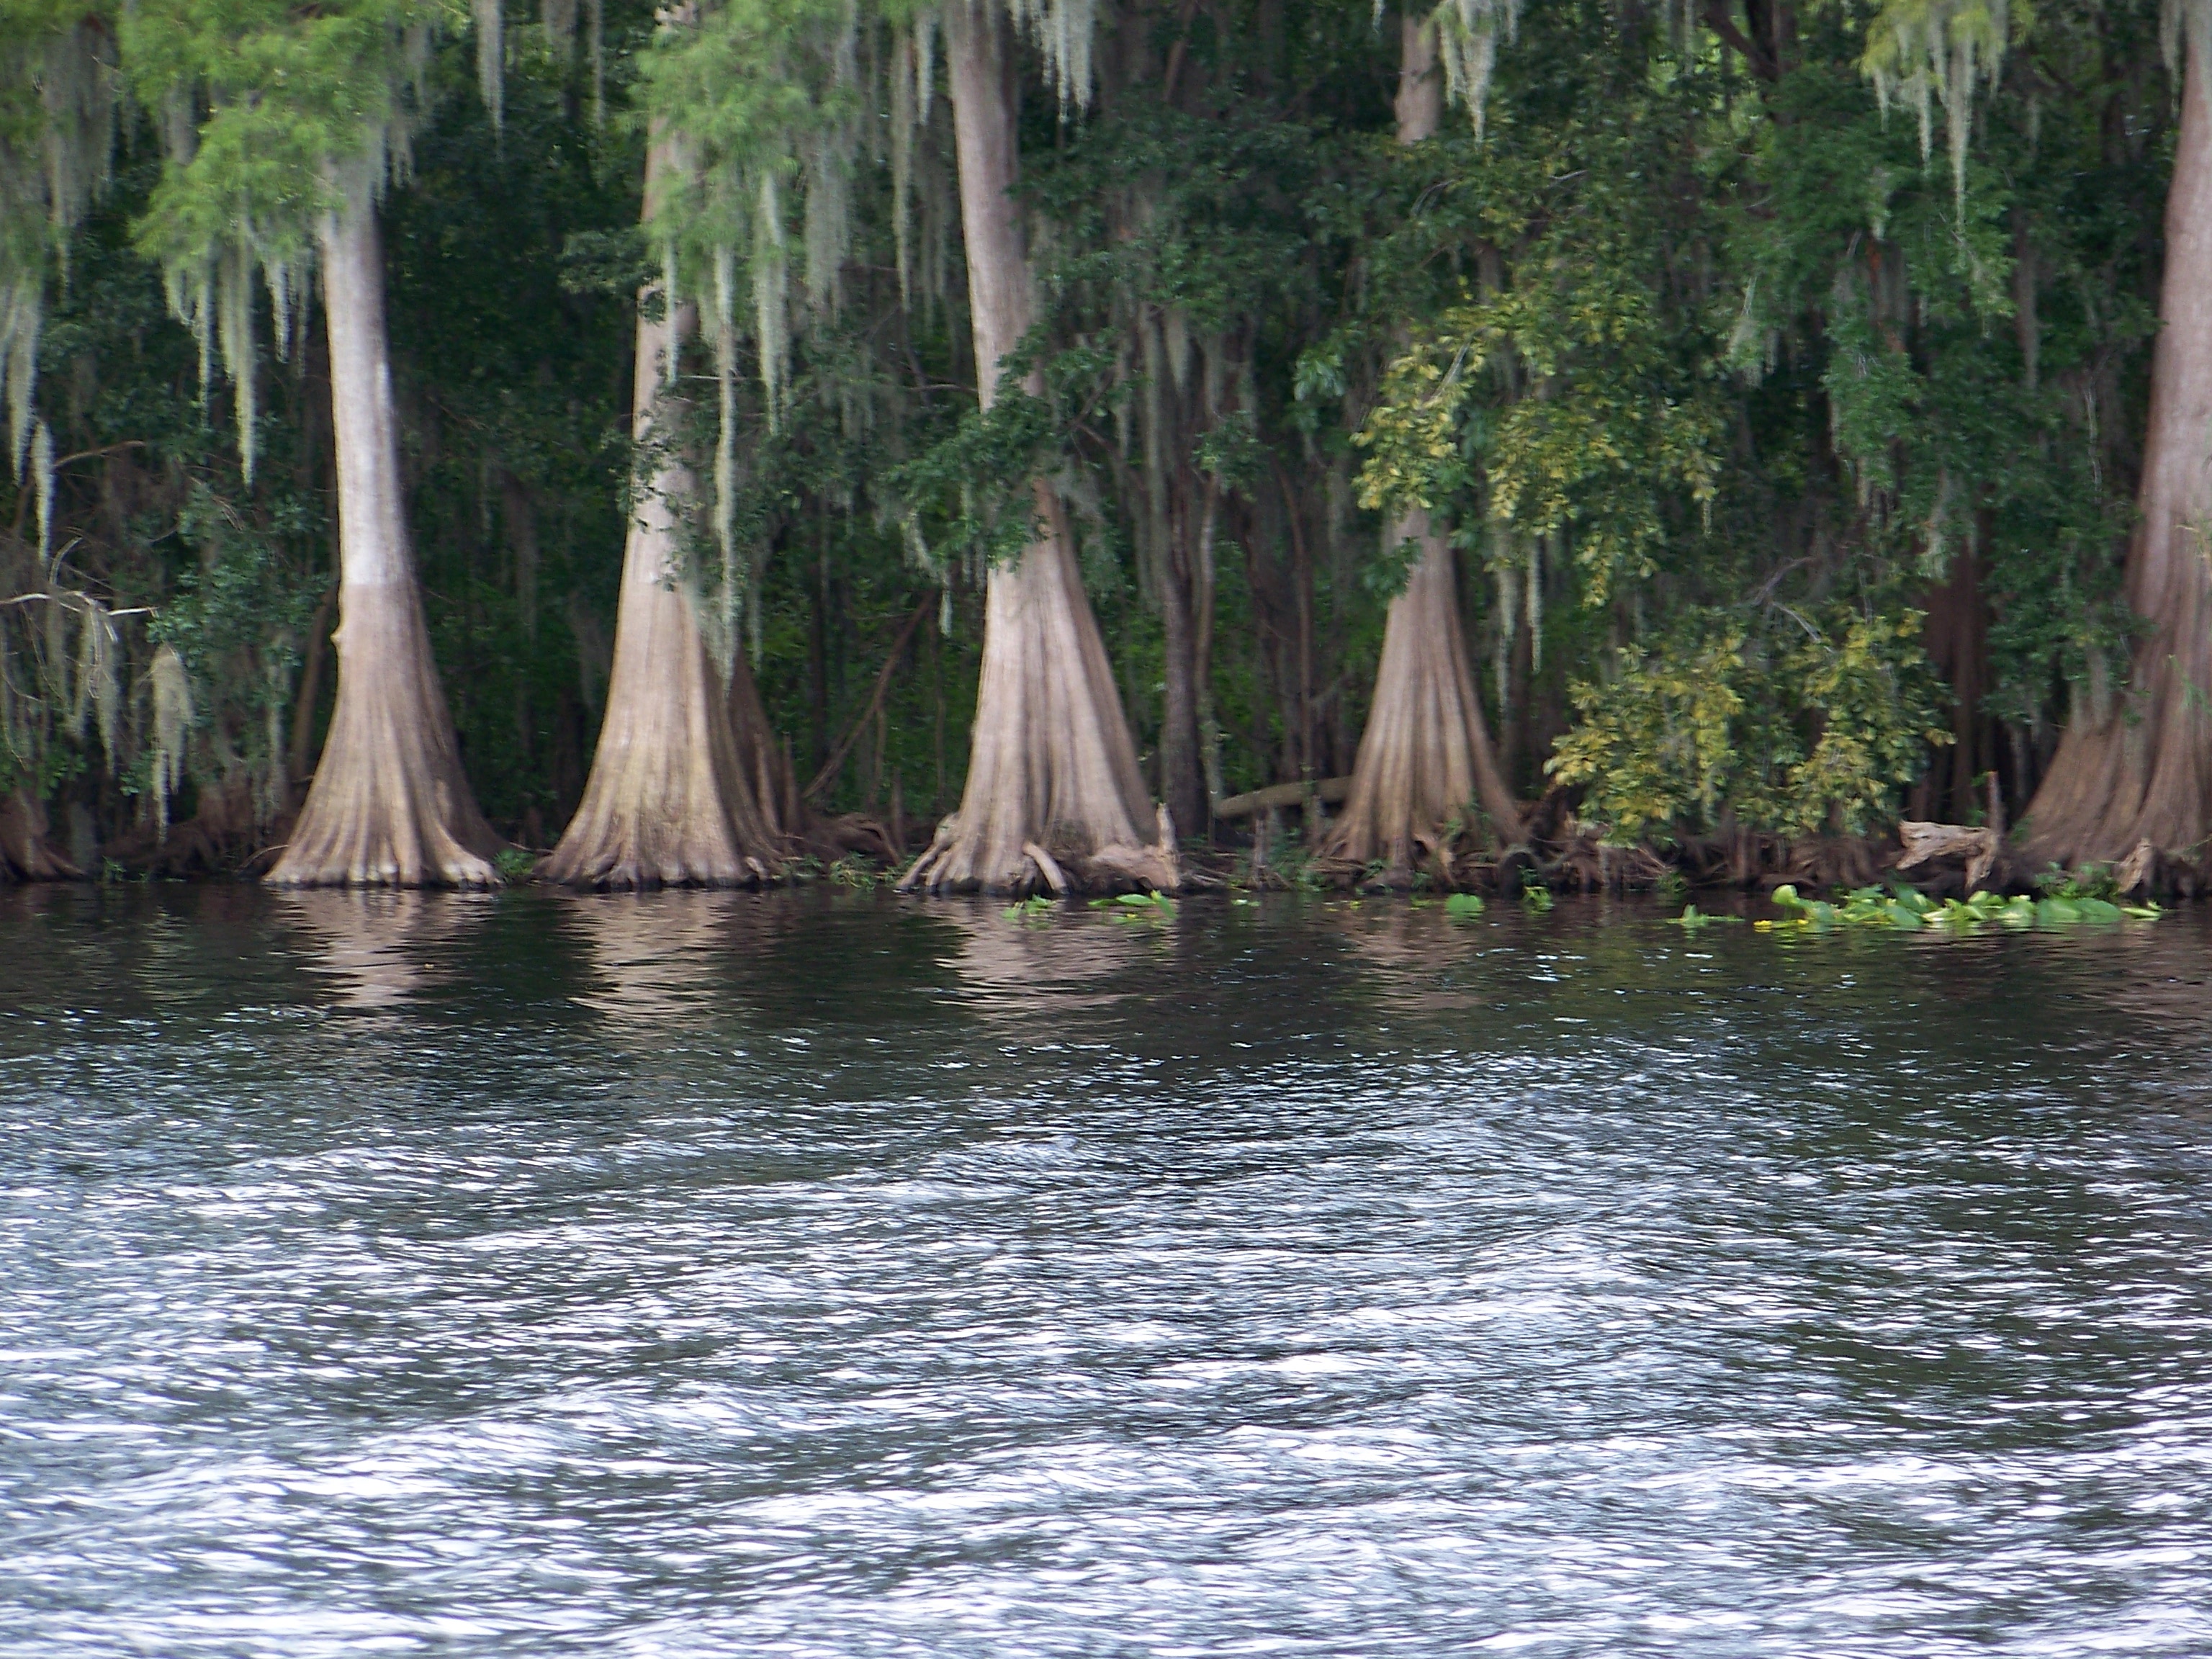 Drifting along the St. Johns River in FL on my brother Captain Ron's Native II.